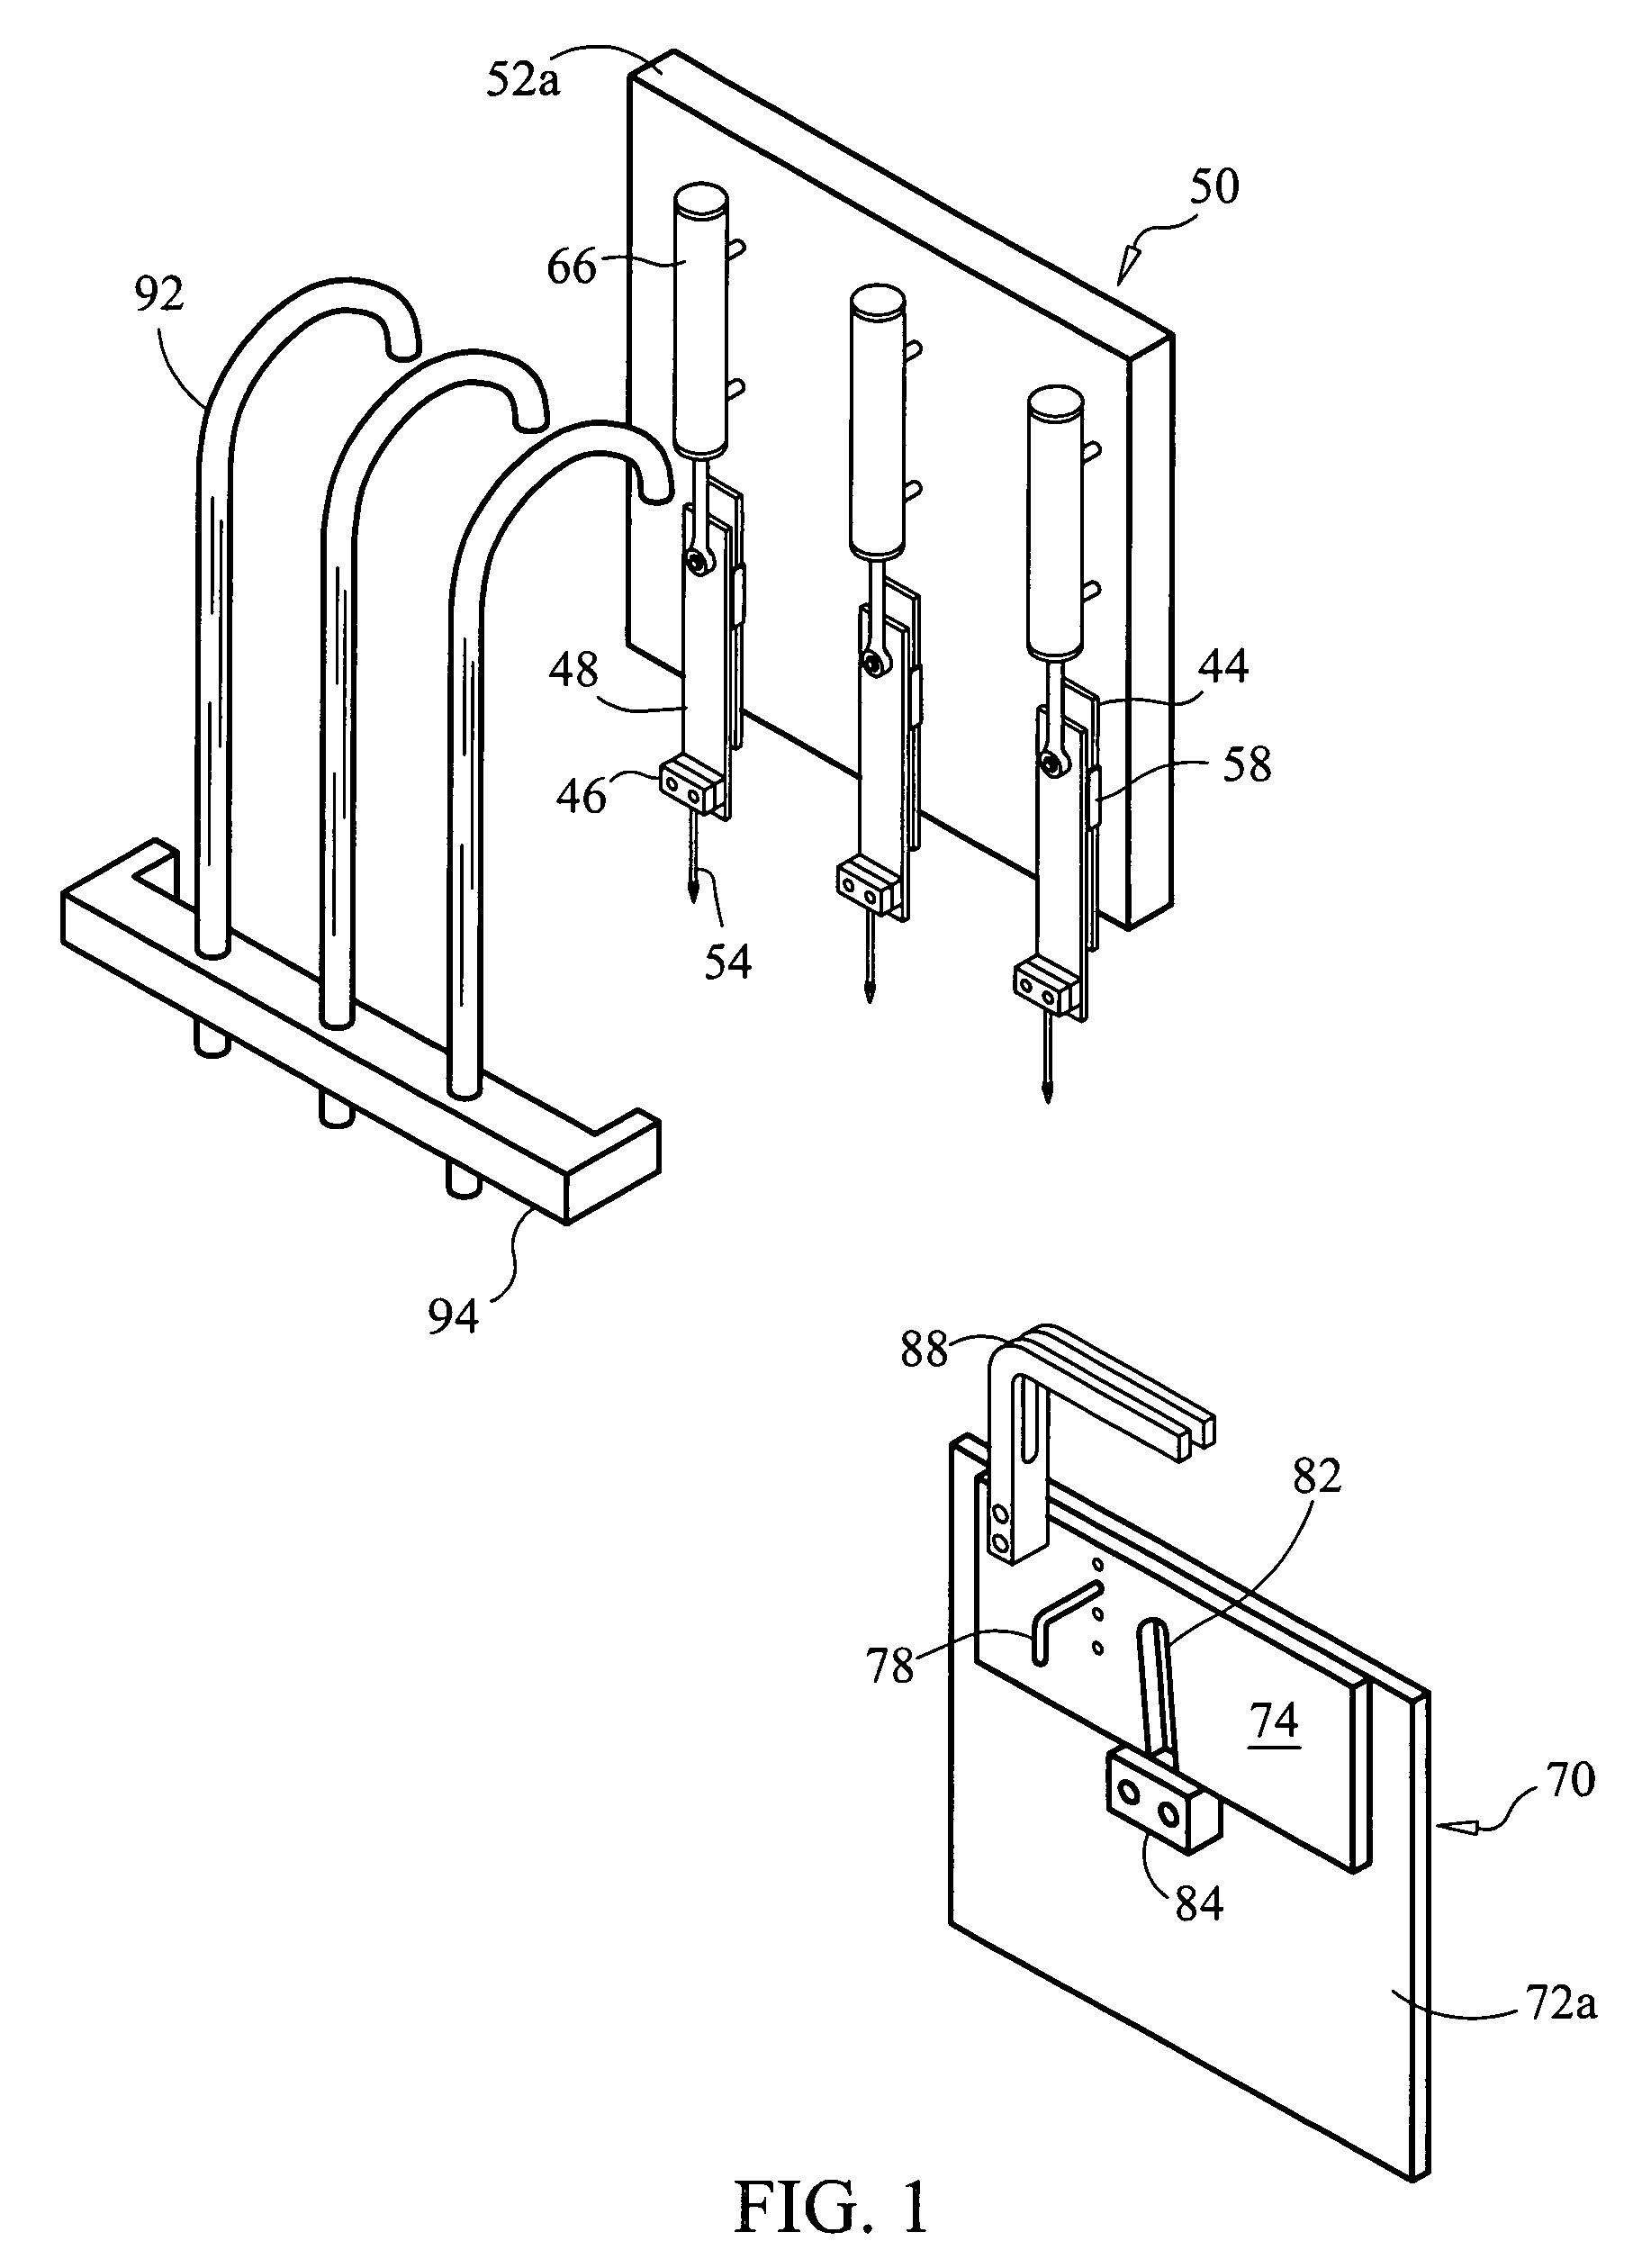 Tufting machine for producing athletic turf having a graphic design